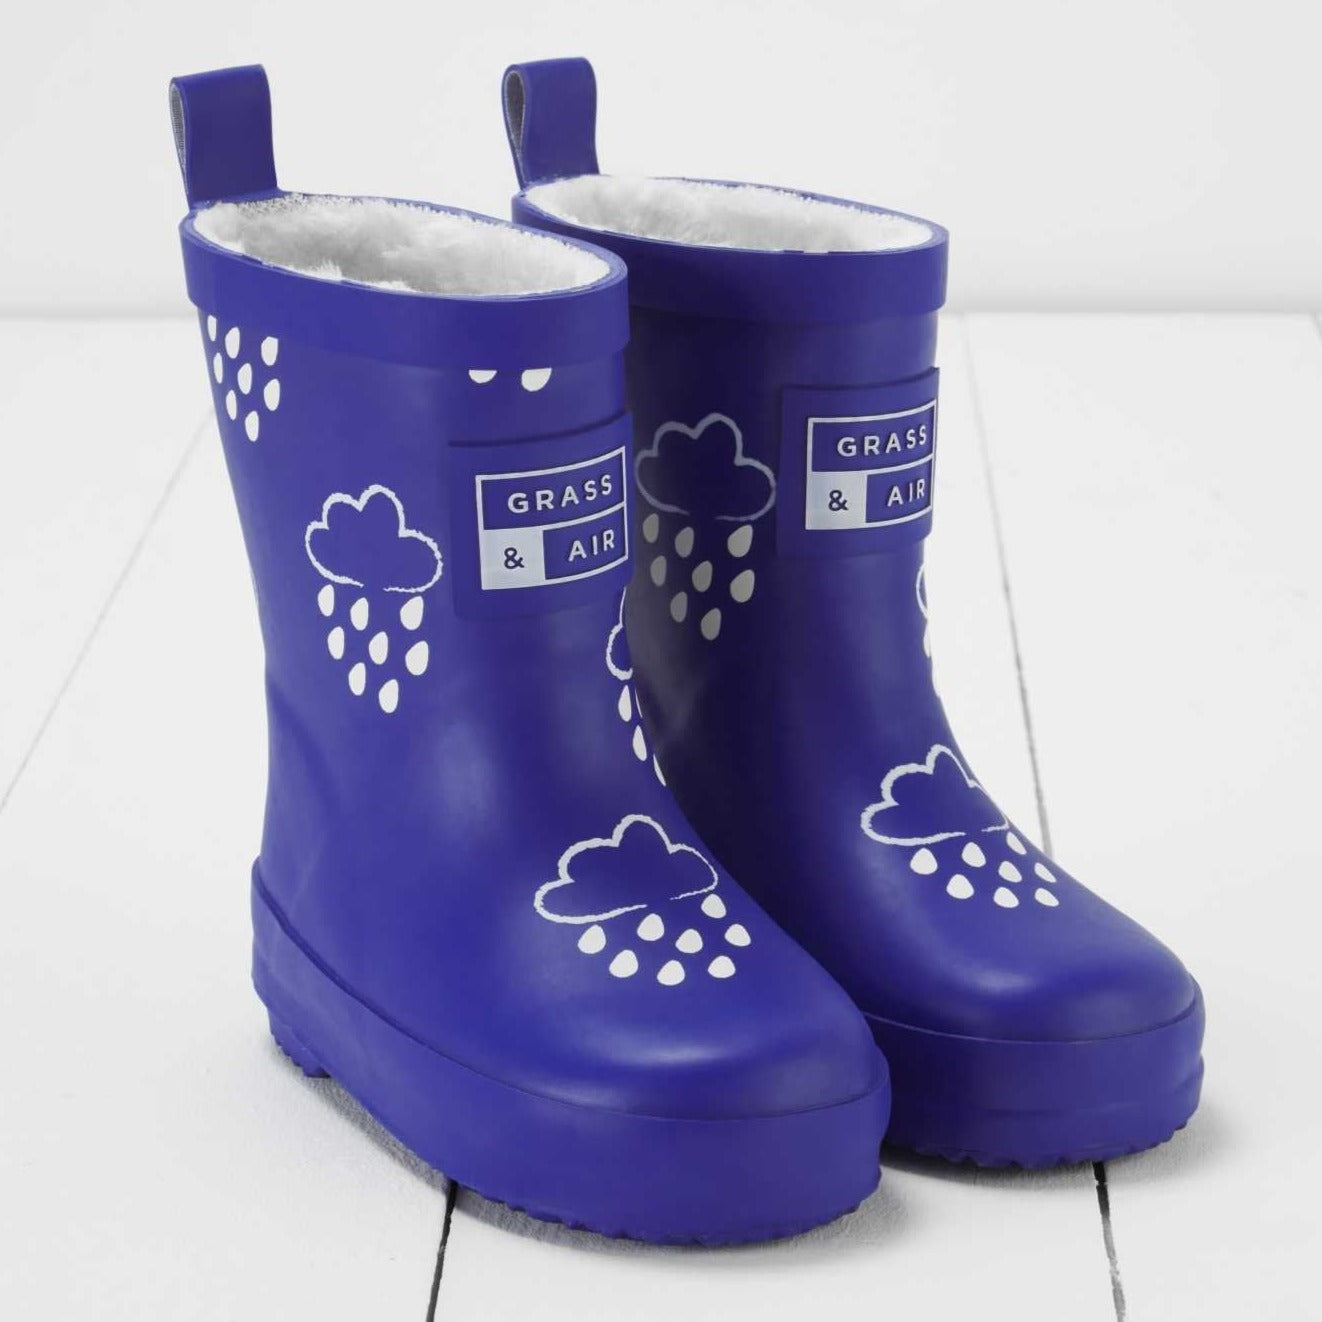 Grass & Air Wellie Boots Kids Colour Changing Wellies (Inky Blue)